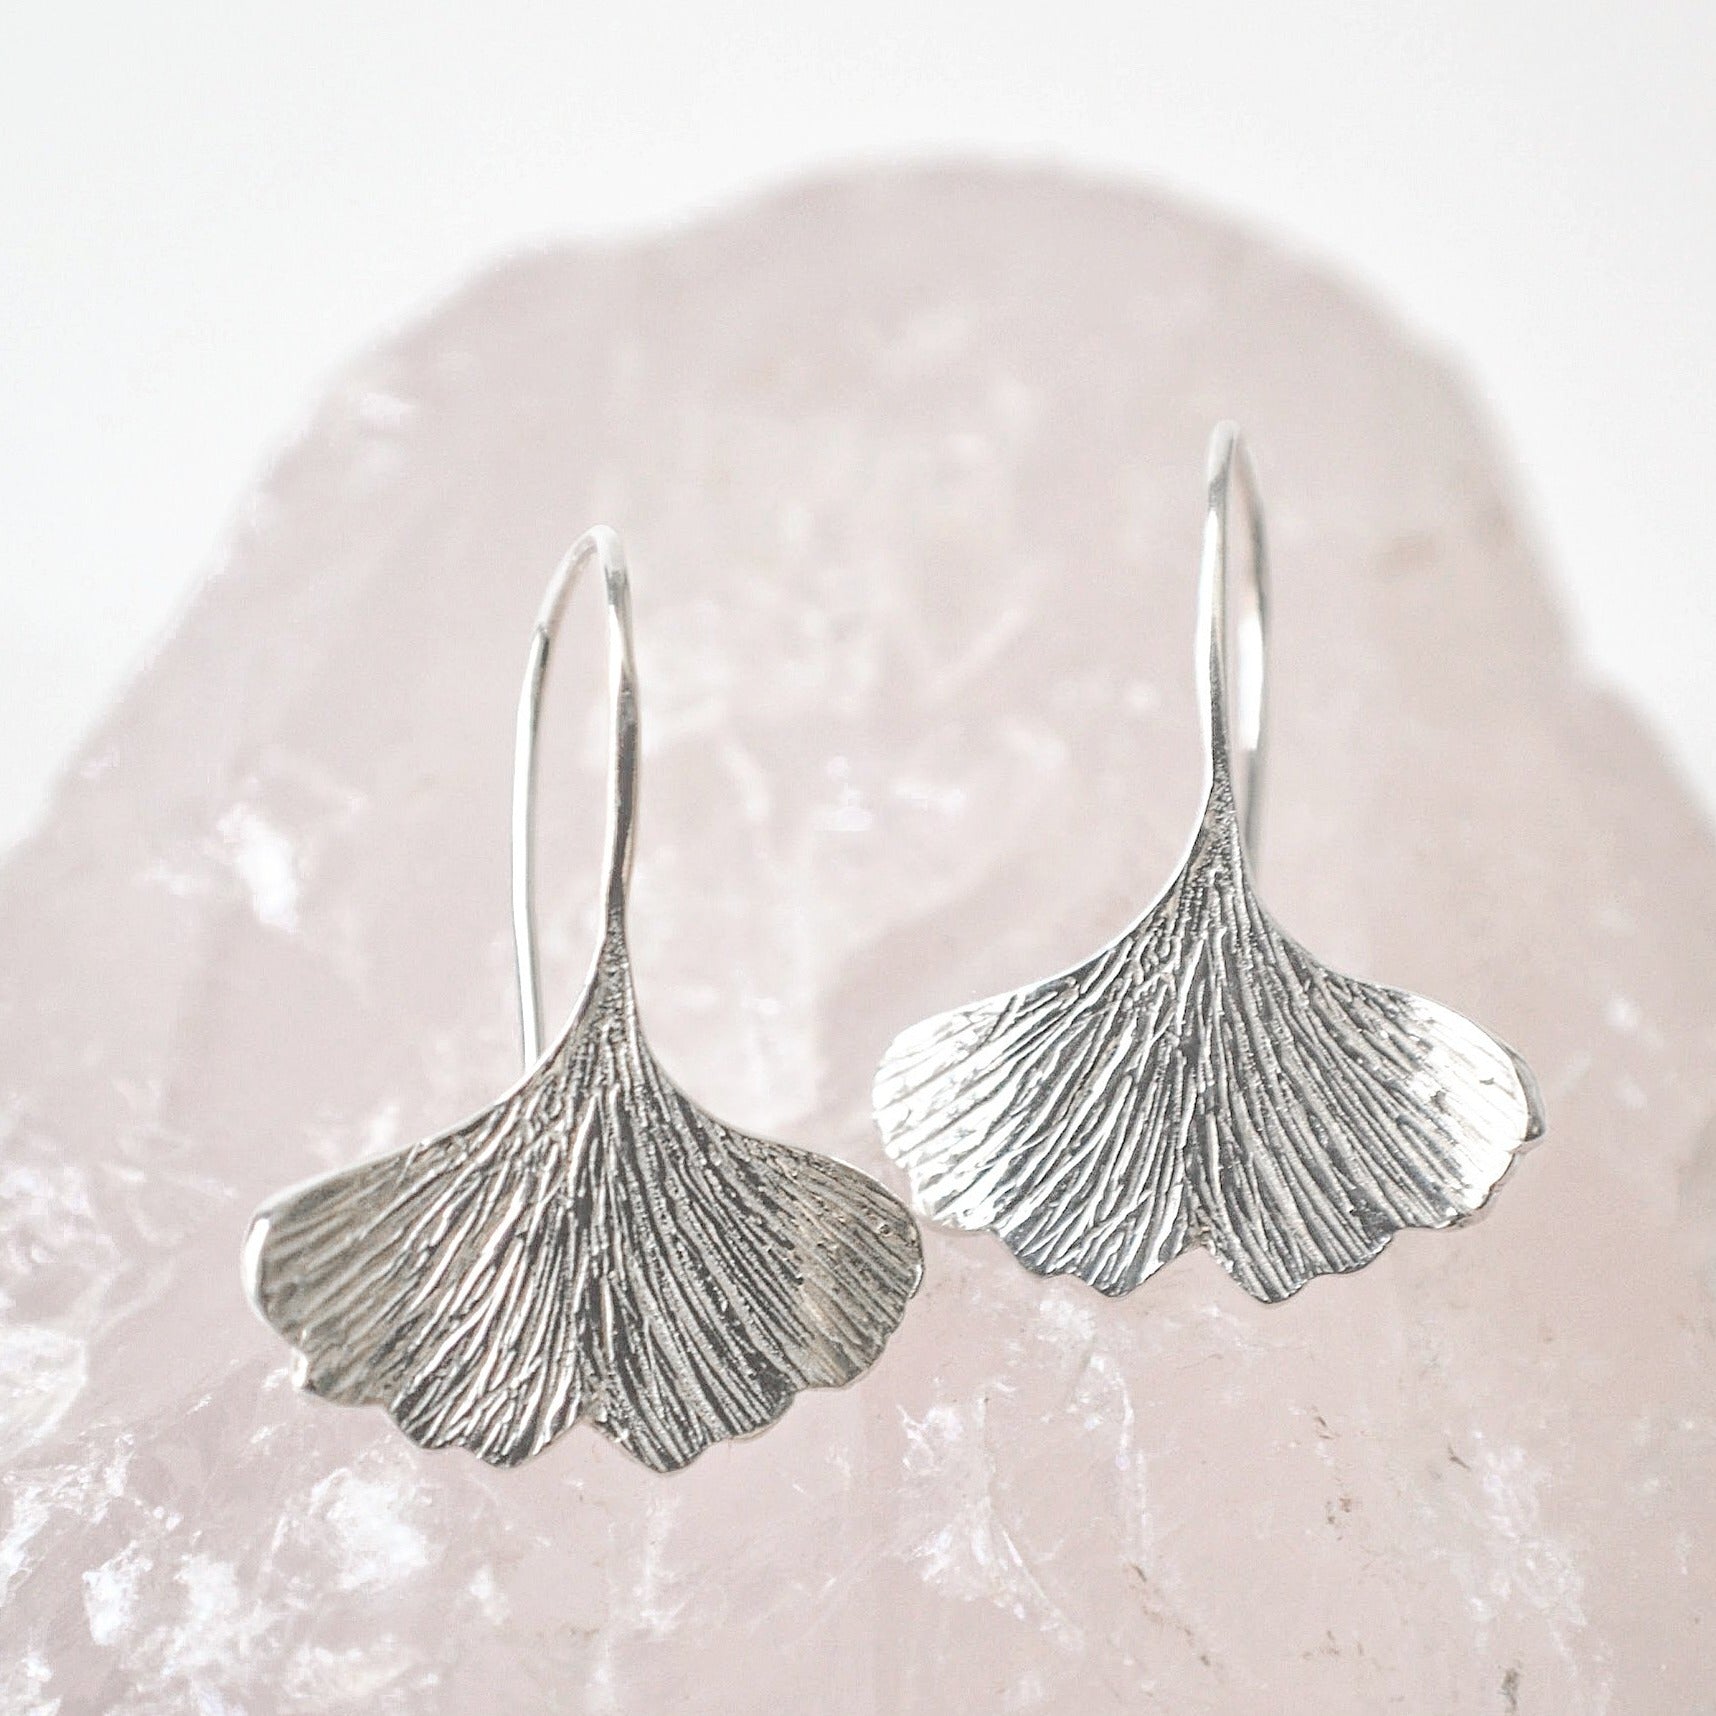 Textured sterling silver ginkgo leaf shaped dangle earrings resting on a piece of rose quartz